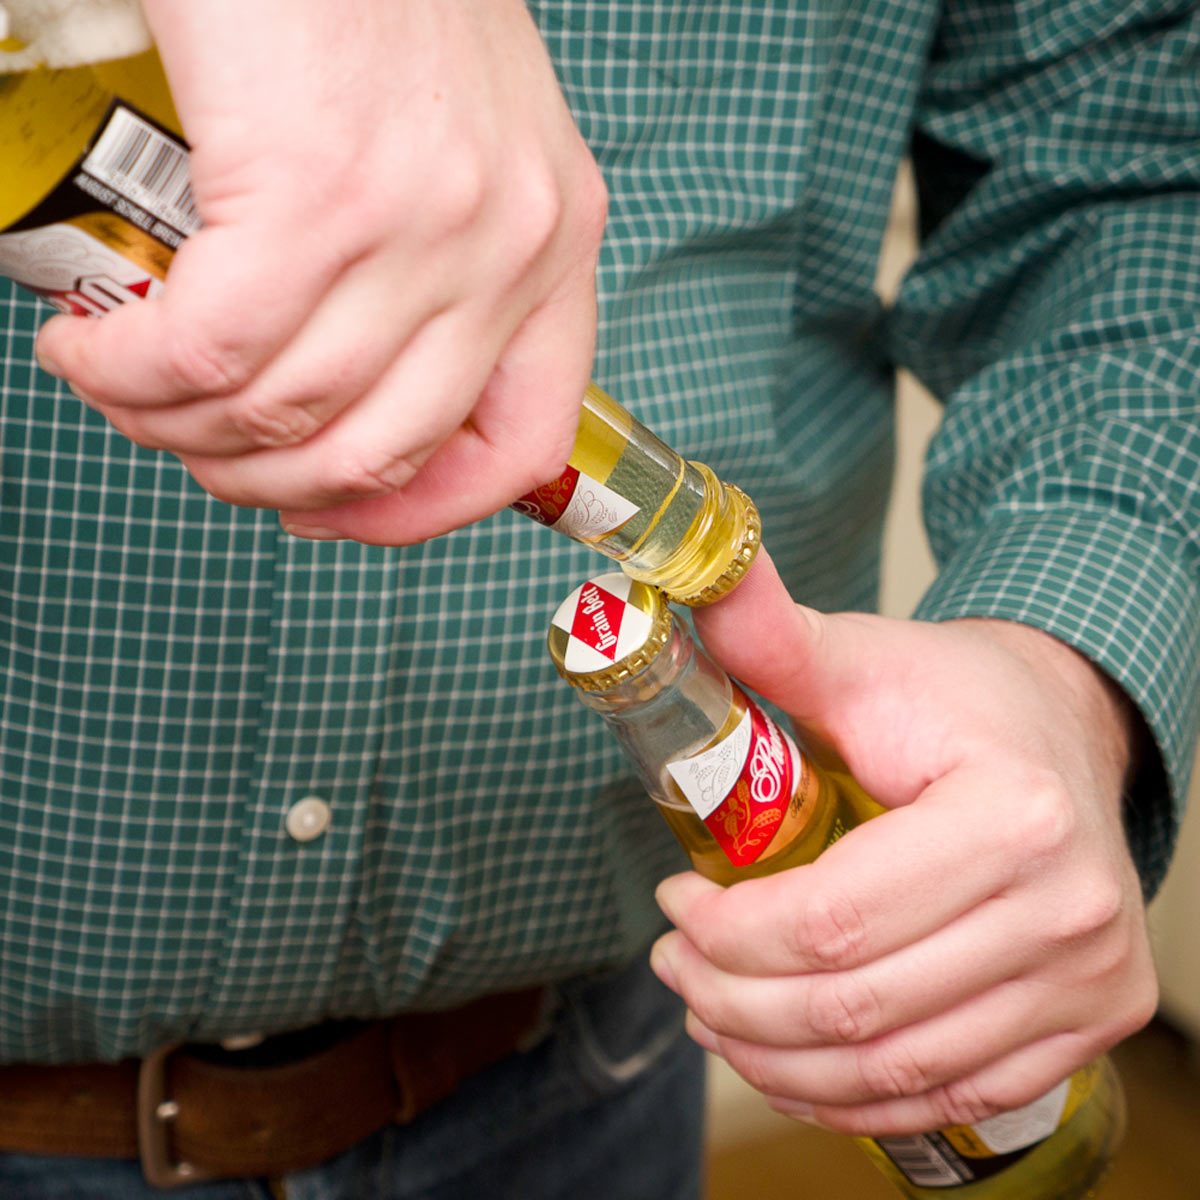 5 Clever Ways To Open A Beer Bottle Without An Opener - NDTV Food